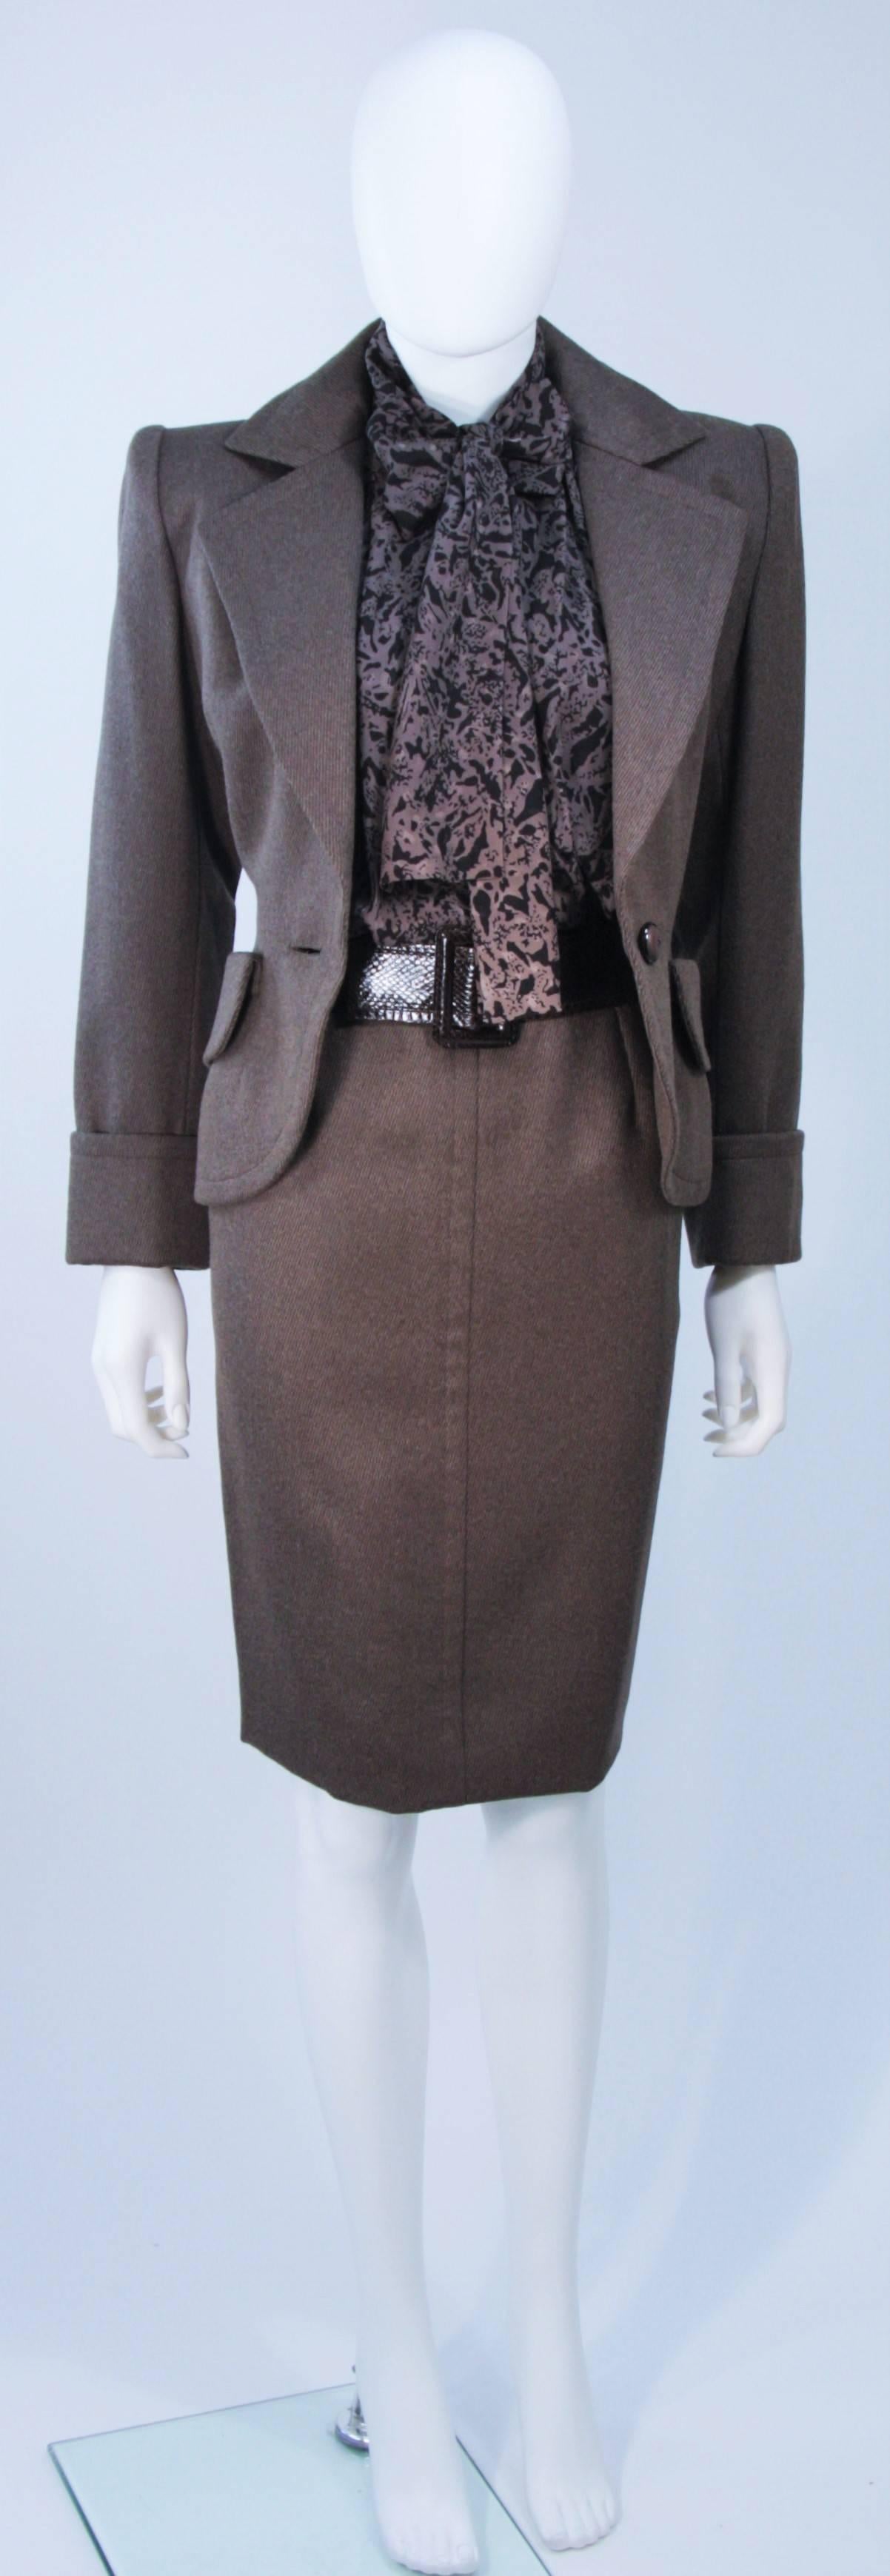  This Givenchy Couture skirt suit is composed of brown wool, a printed silk blouse, and a snakeskin belt. The jacket has center front button closures, structured shoulders, and front pockets. The printed silk blouse features center front button